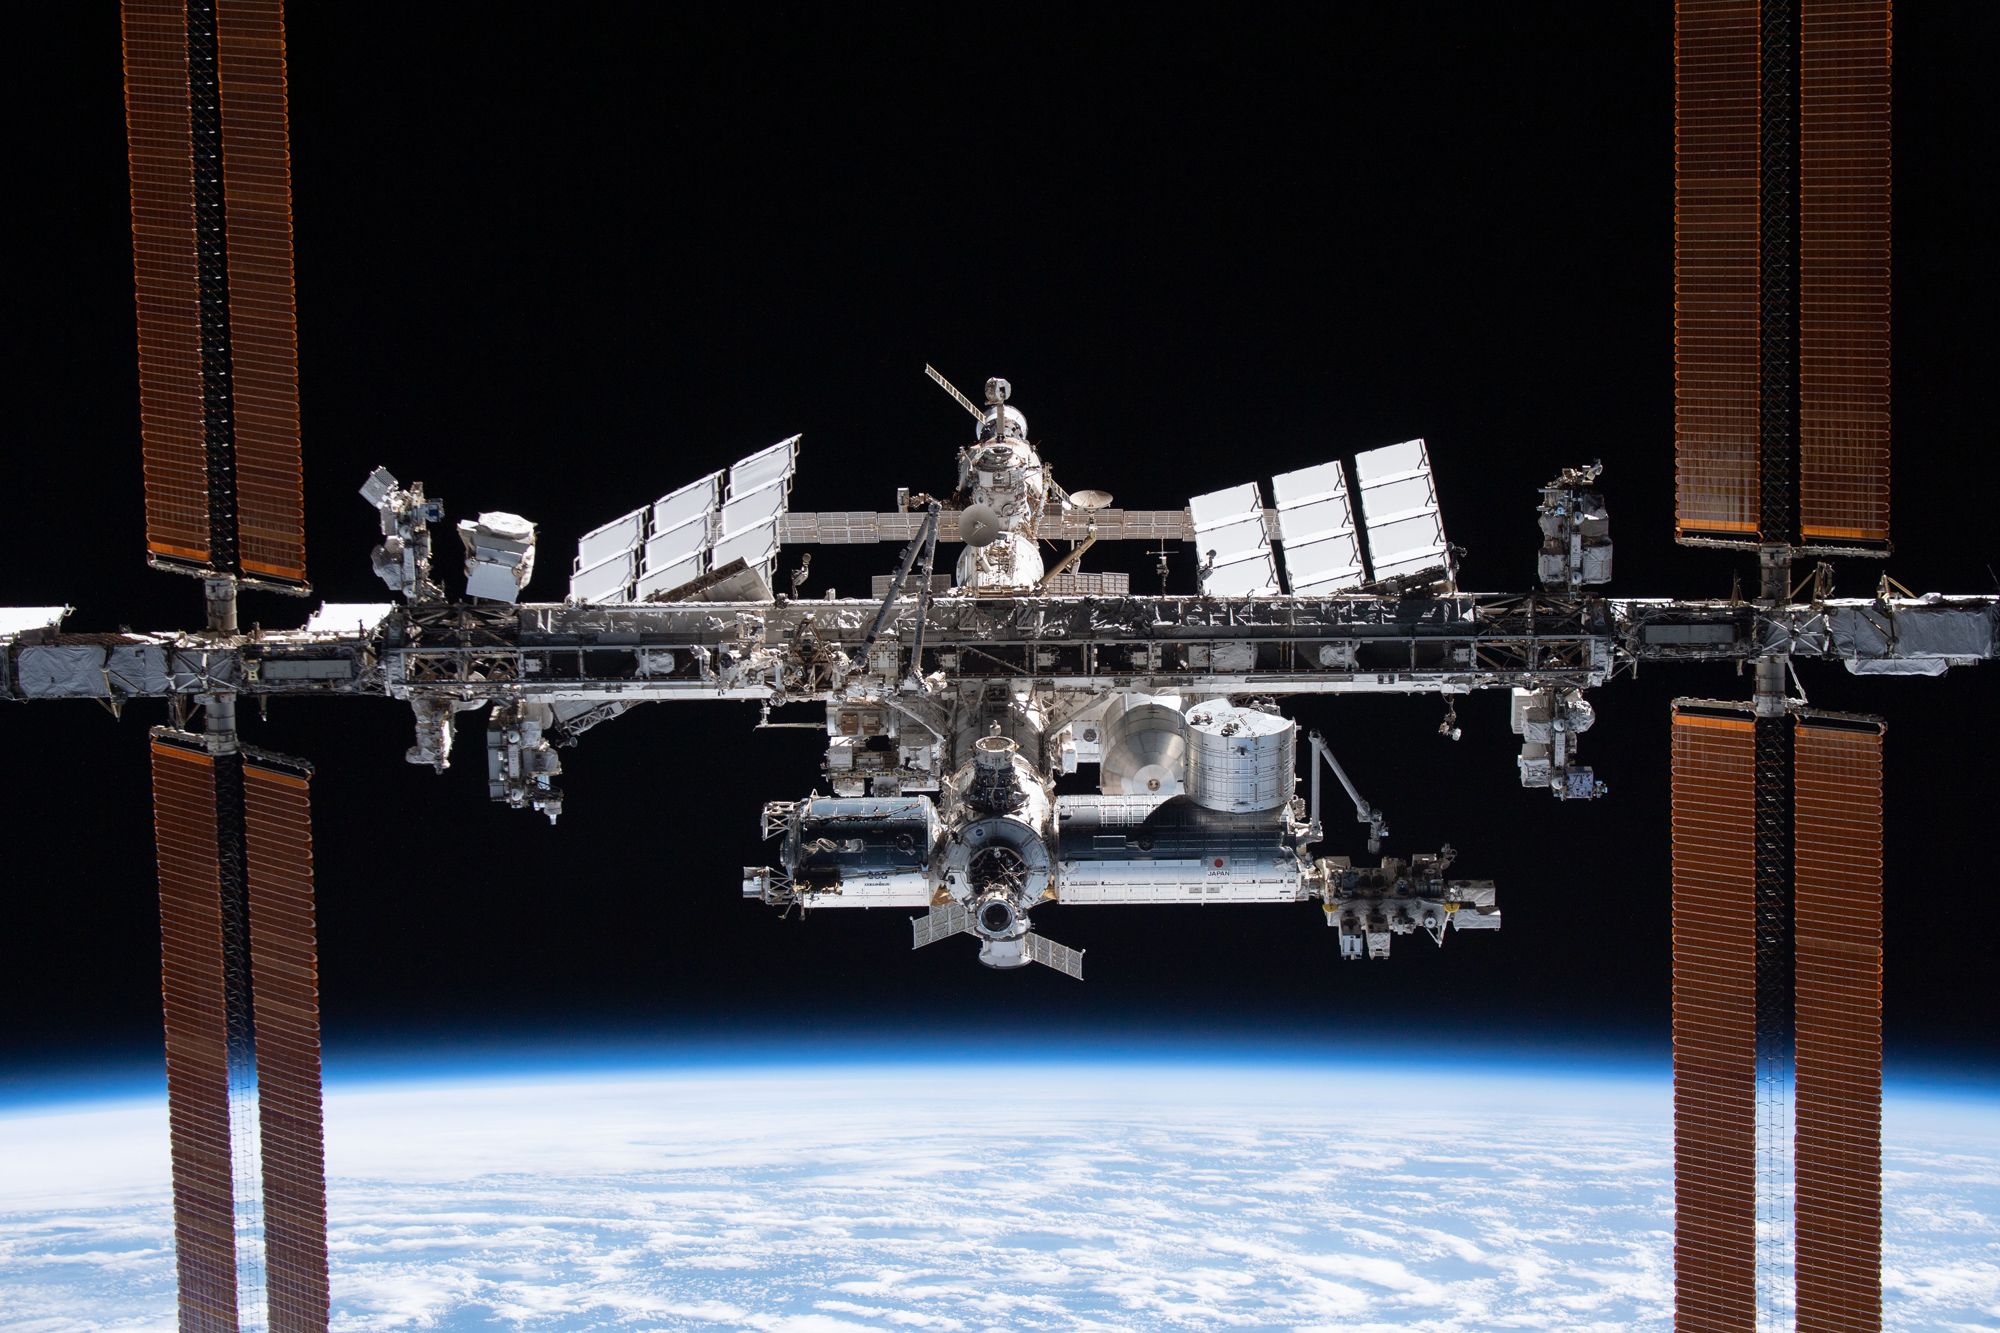 The International Space Station to be retired and crashed into the Pacific  Ocean | CNN